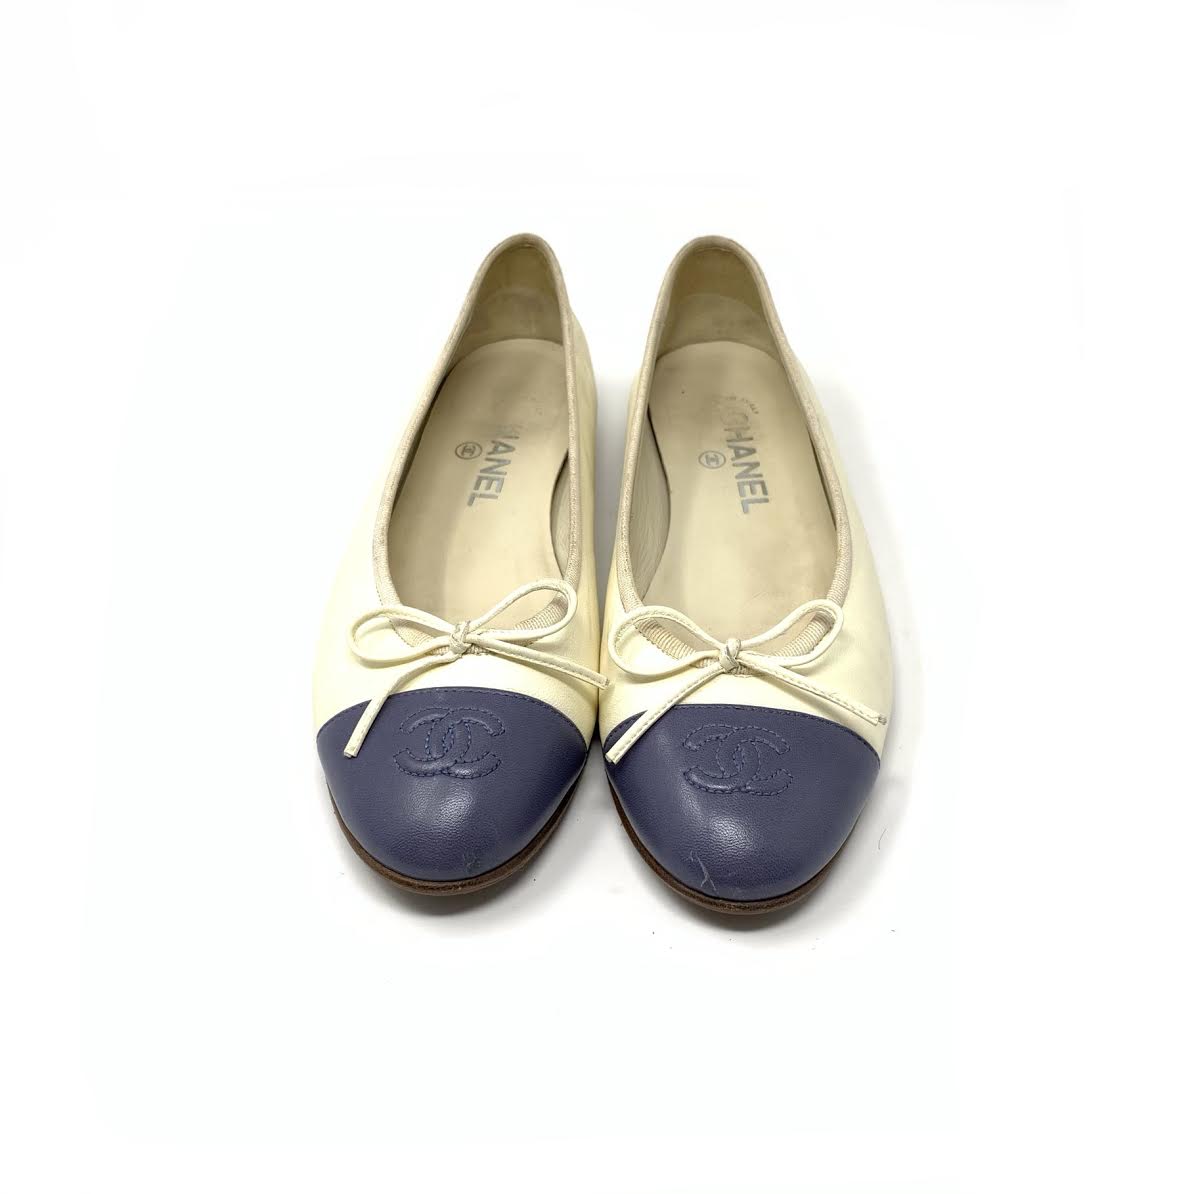 CHANEL, Shoes, Chanel Ballet Flats